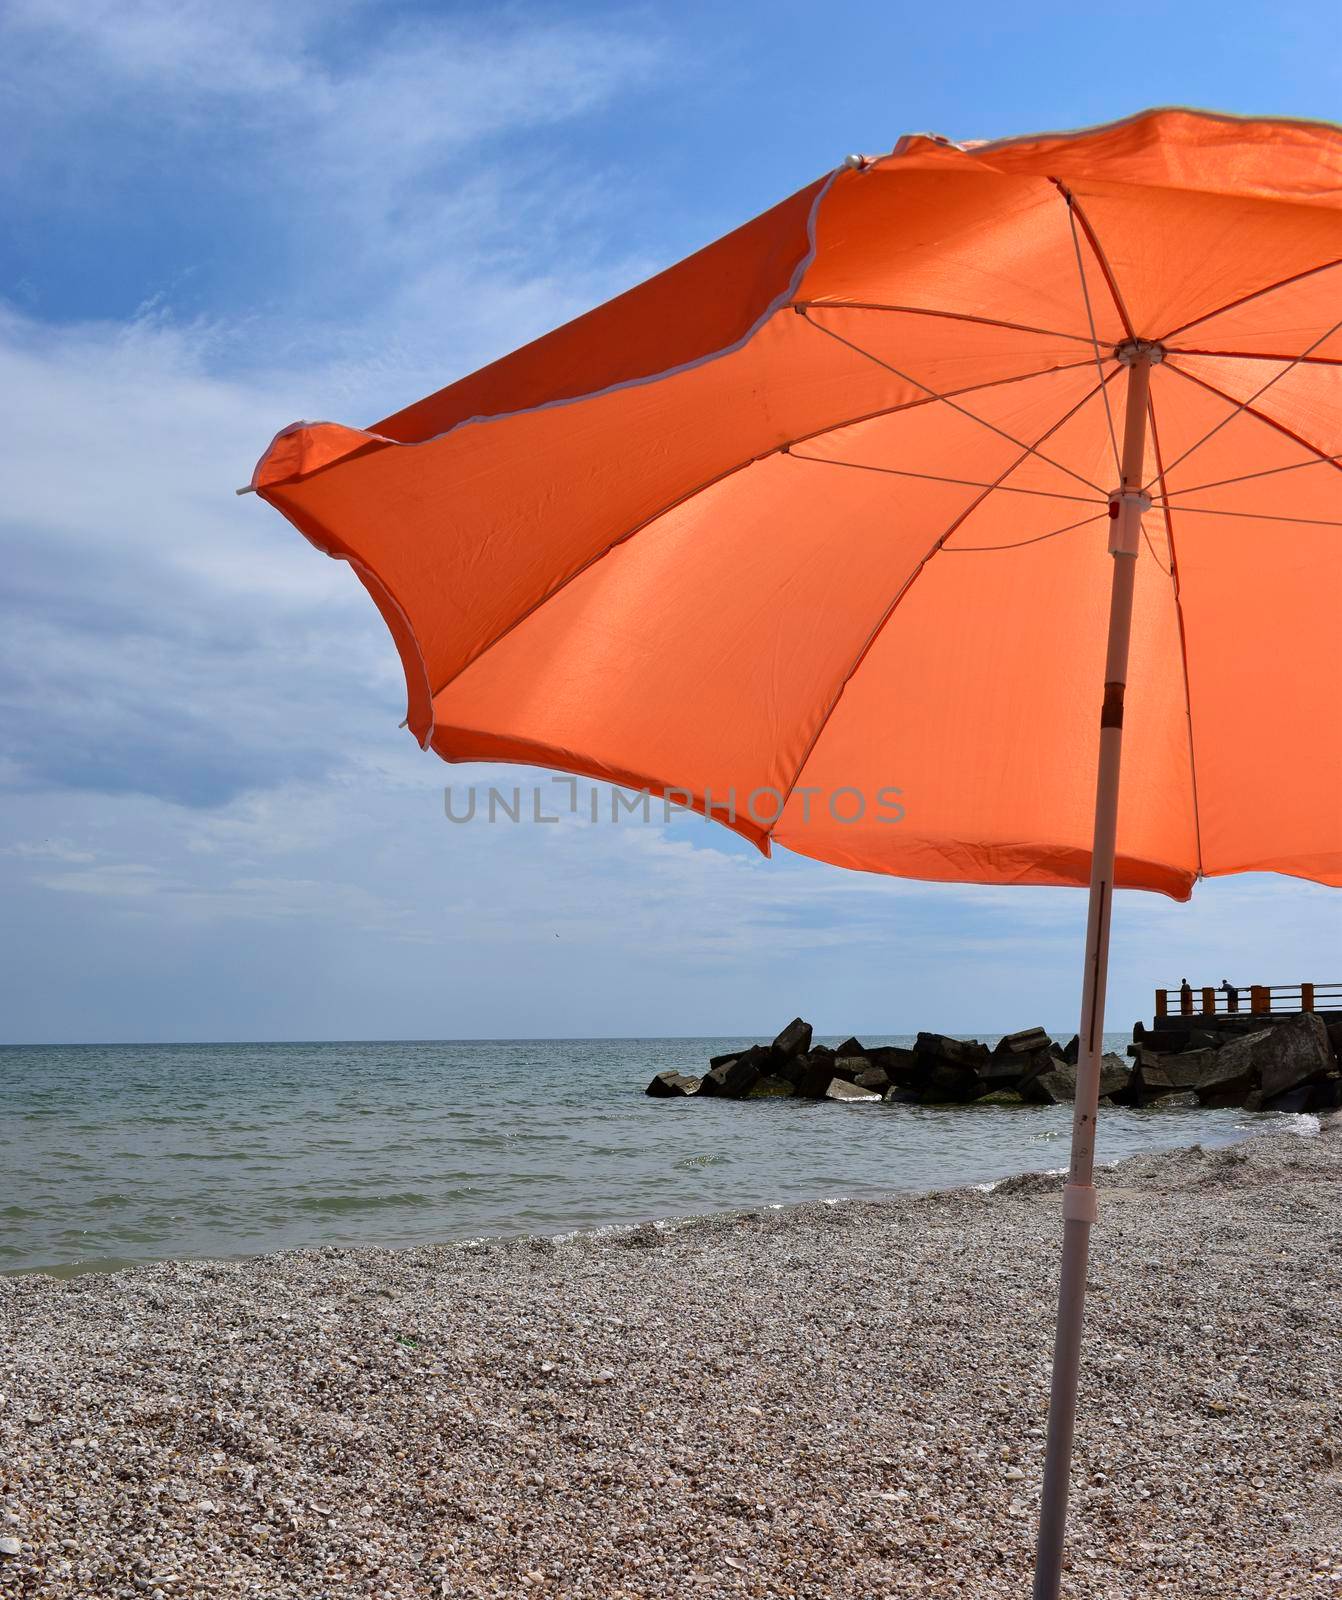 Orange beach umbrella near the sea in sunny day. Beautiful blue sky and clouds. Relaxation, vacation idyllic background.